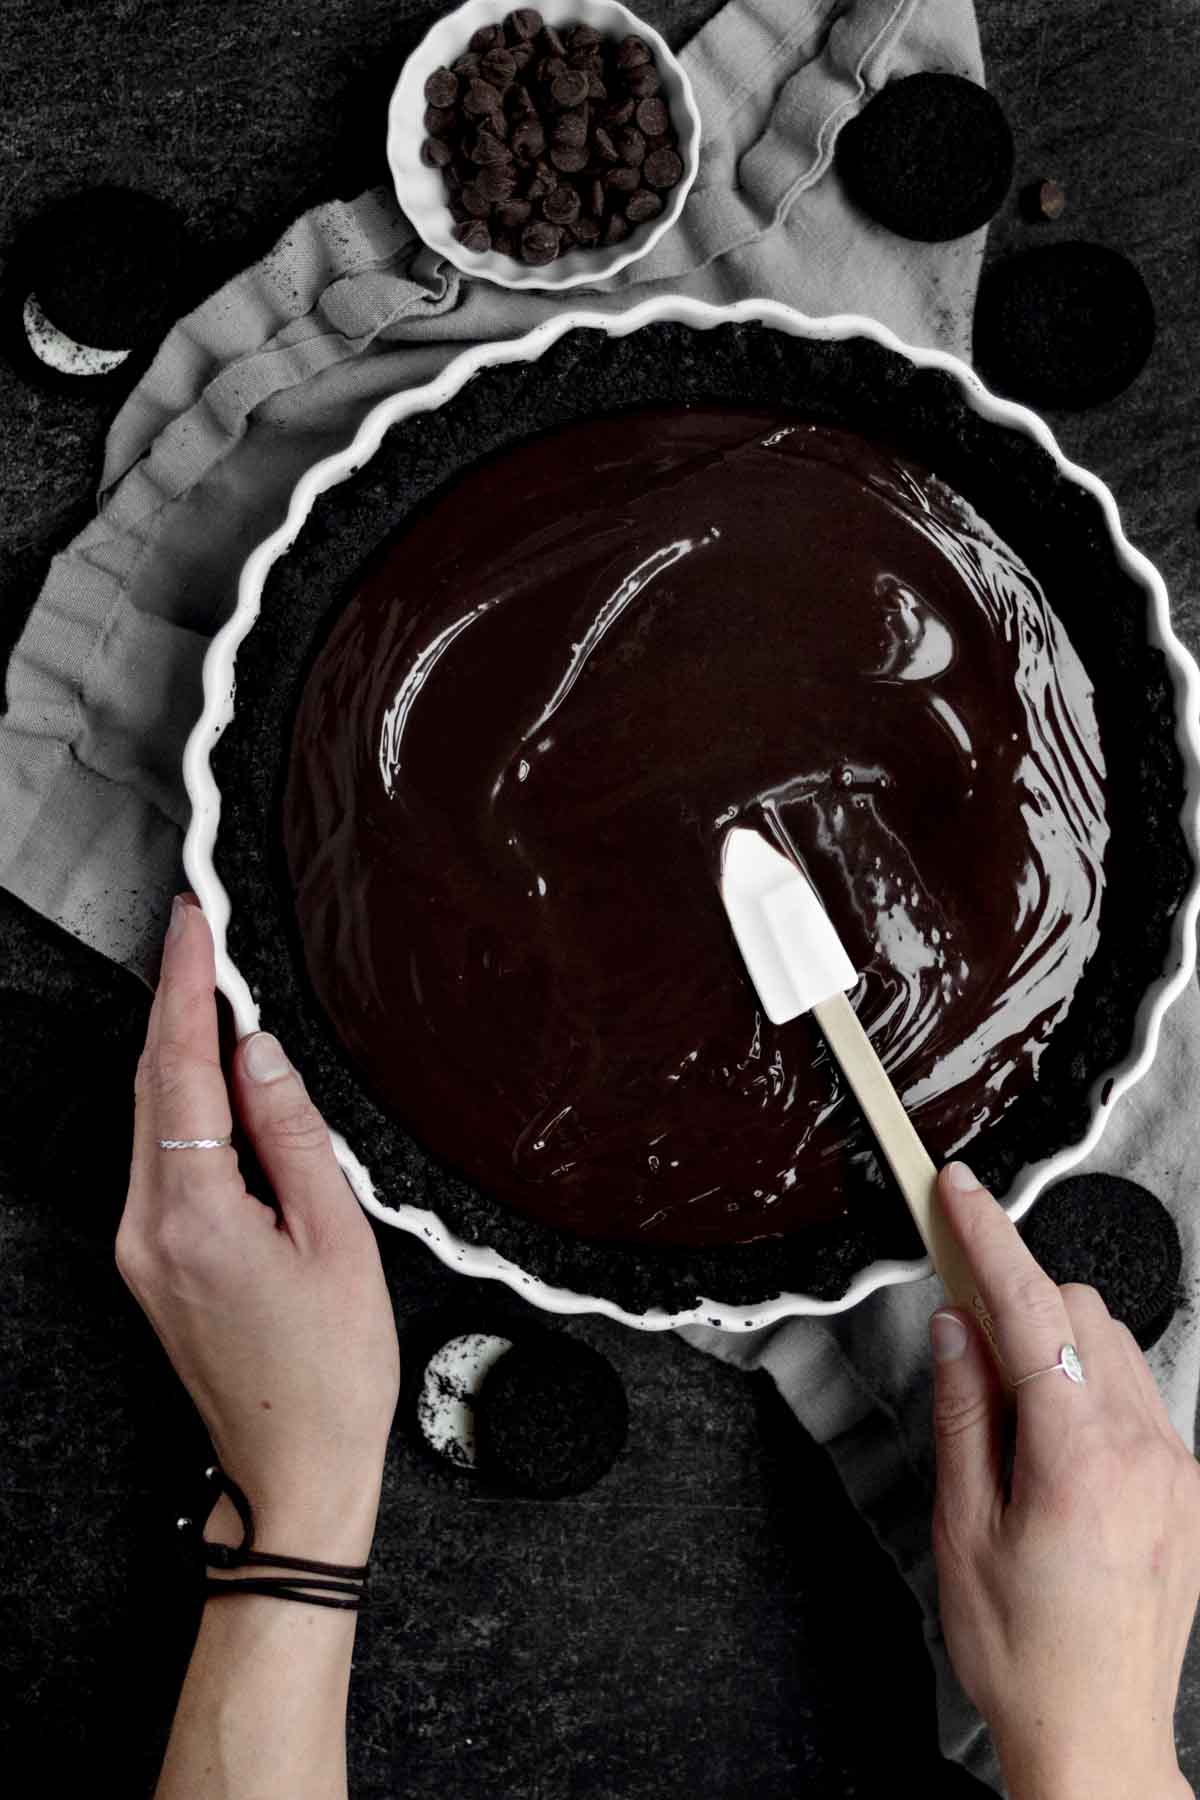 Smoothing out the ganache on top of the sandwich cookie base.